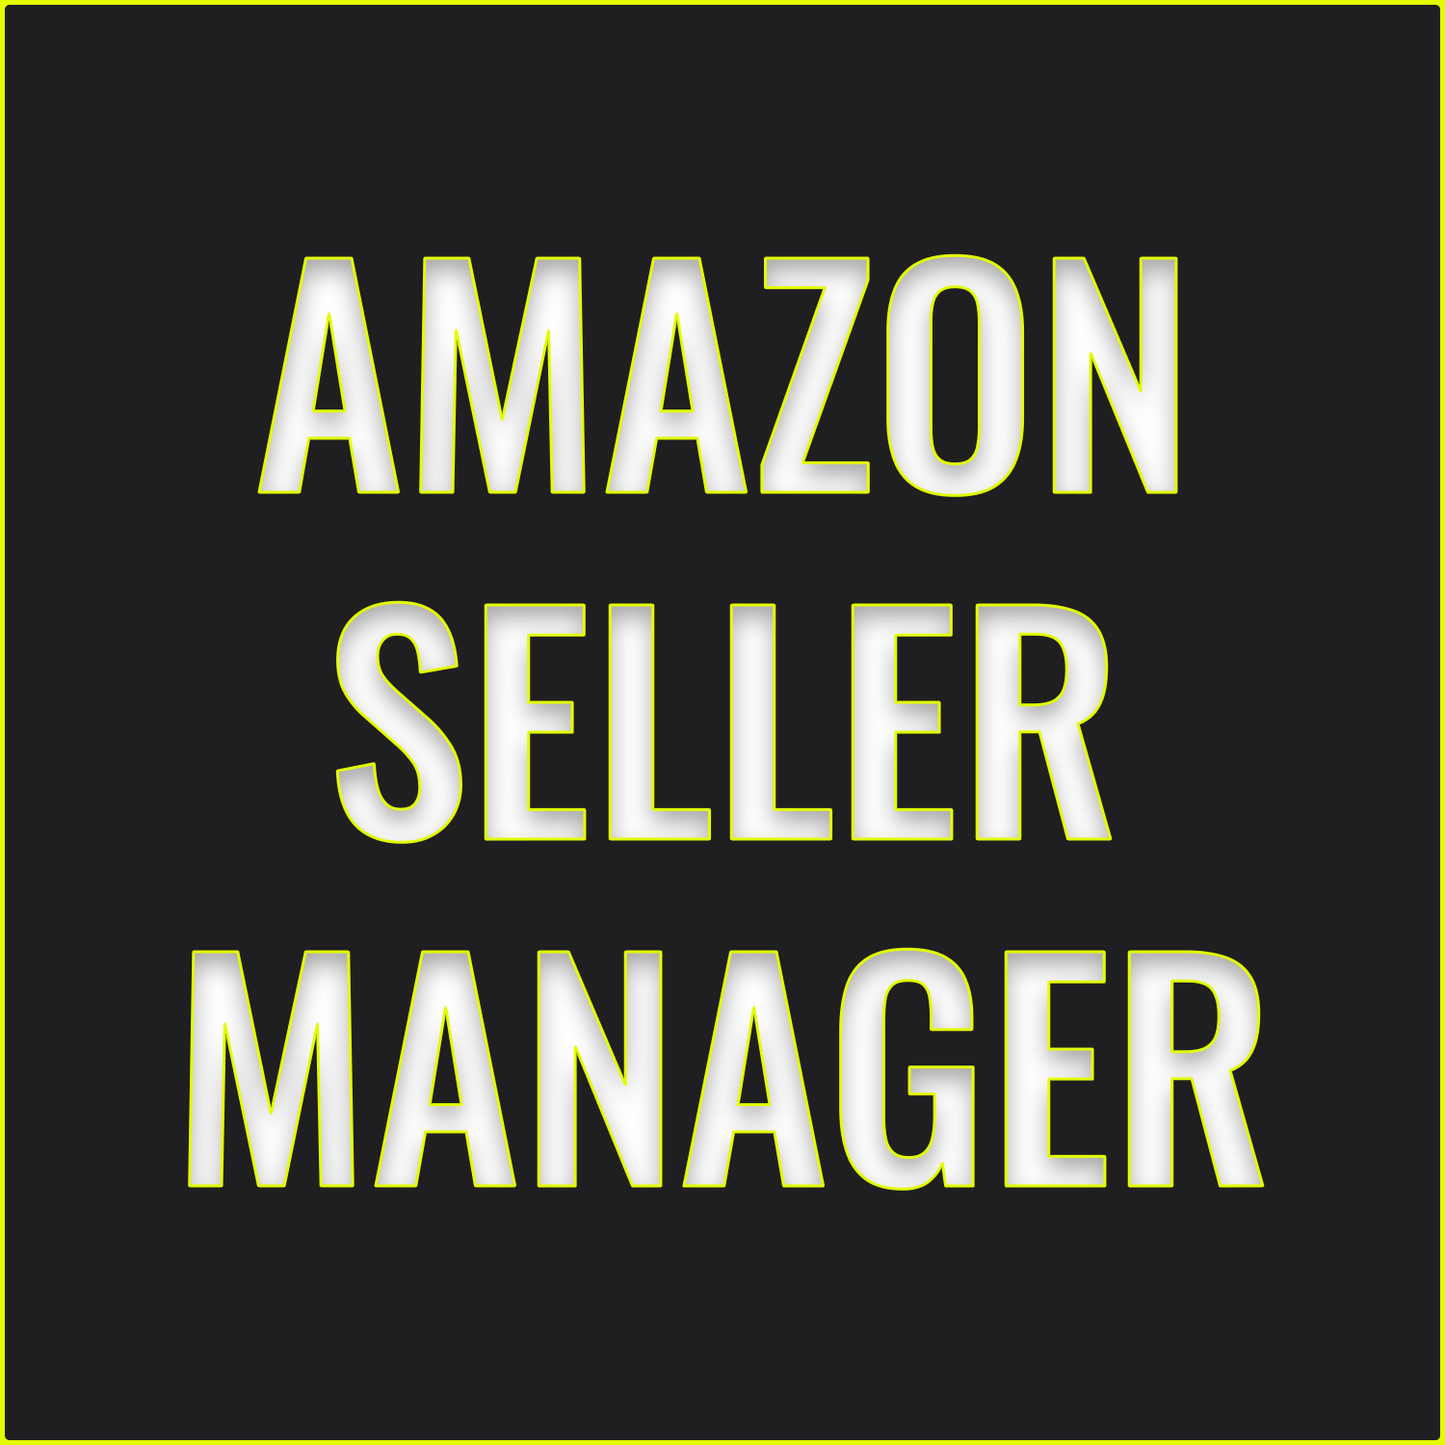 Amazon Seller Account Manager - FBA, PPC, Product Listings, And More